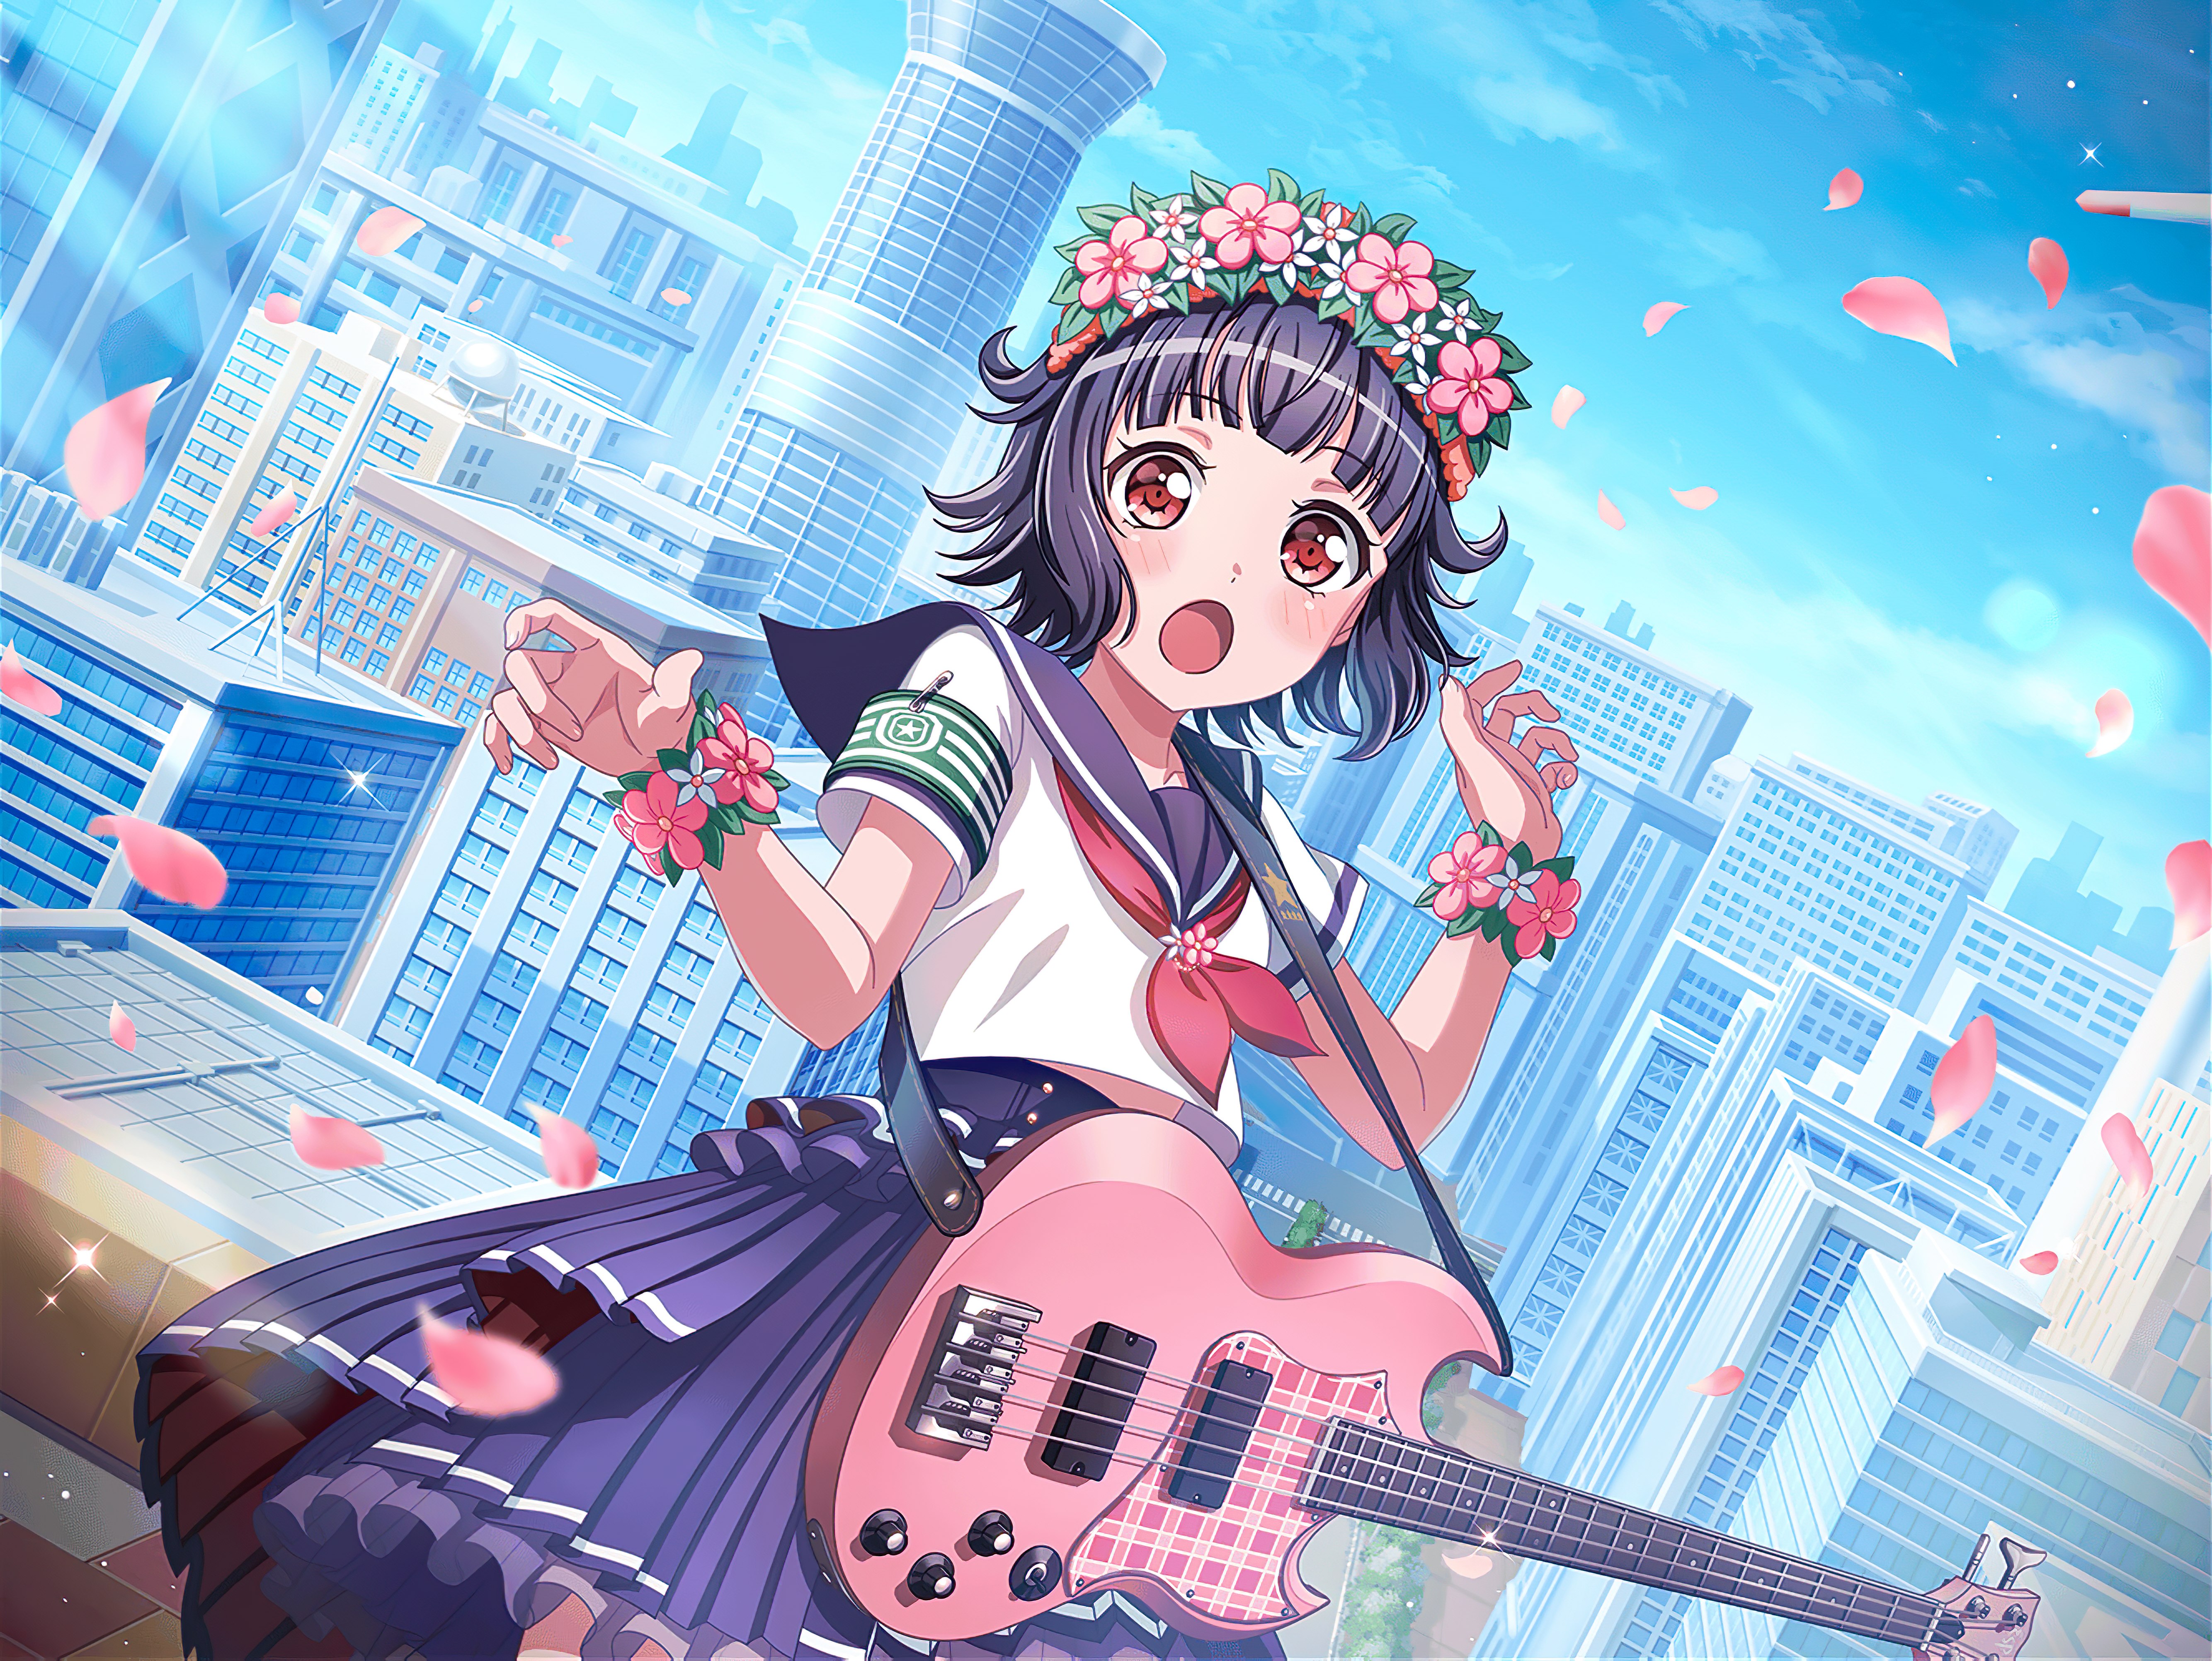 Anime 5336x4008 BanG Dream! anime anime girls Ushigome Rimi flower crown blushing flower in hair guitar musical instrument open mouth flowers petals looking at viewer city building sky clouds sunlight schoolgirl school uniform short hair